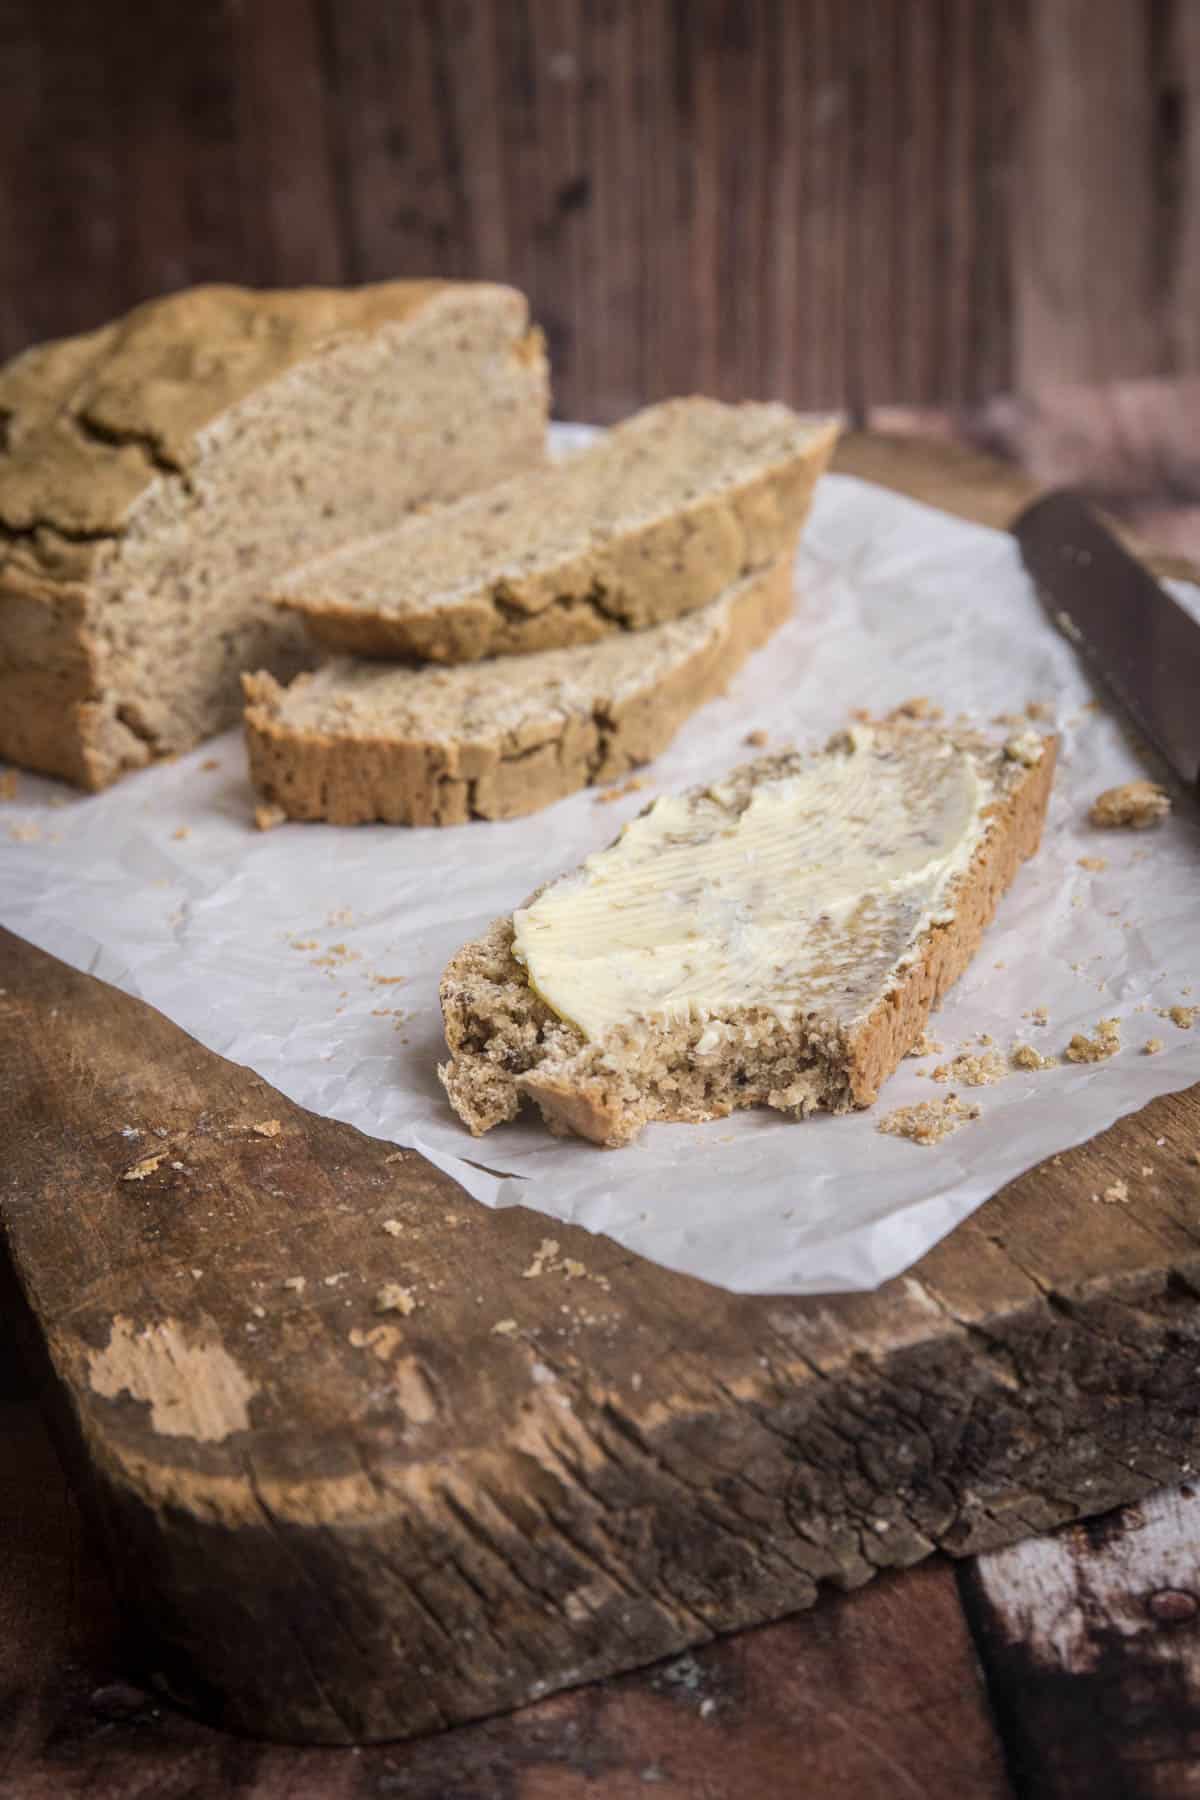 Slice of soda bread slathered with butter and a bite taken out.